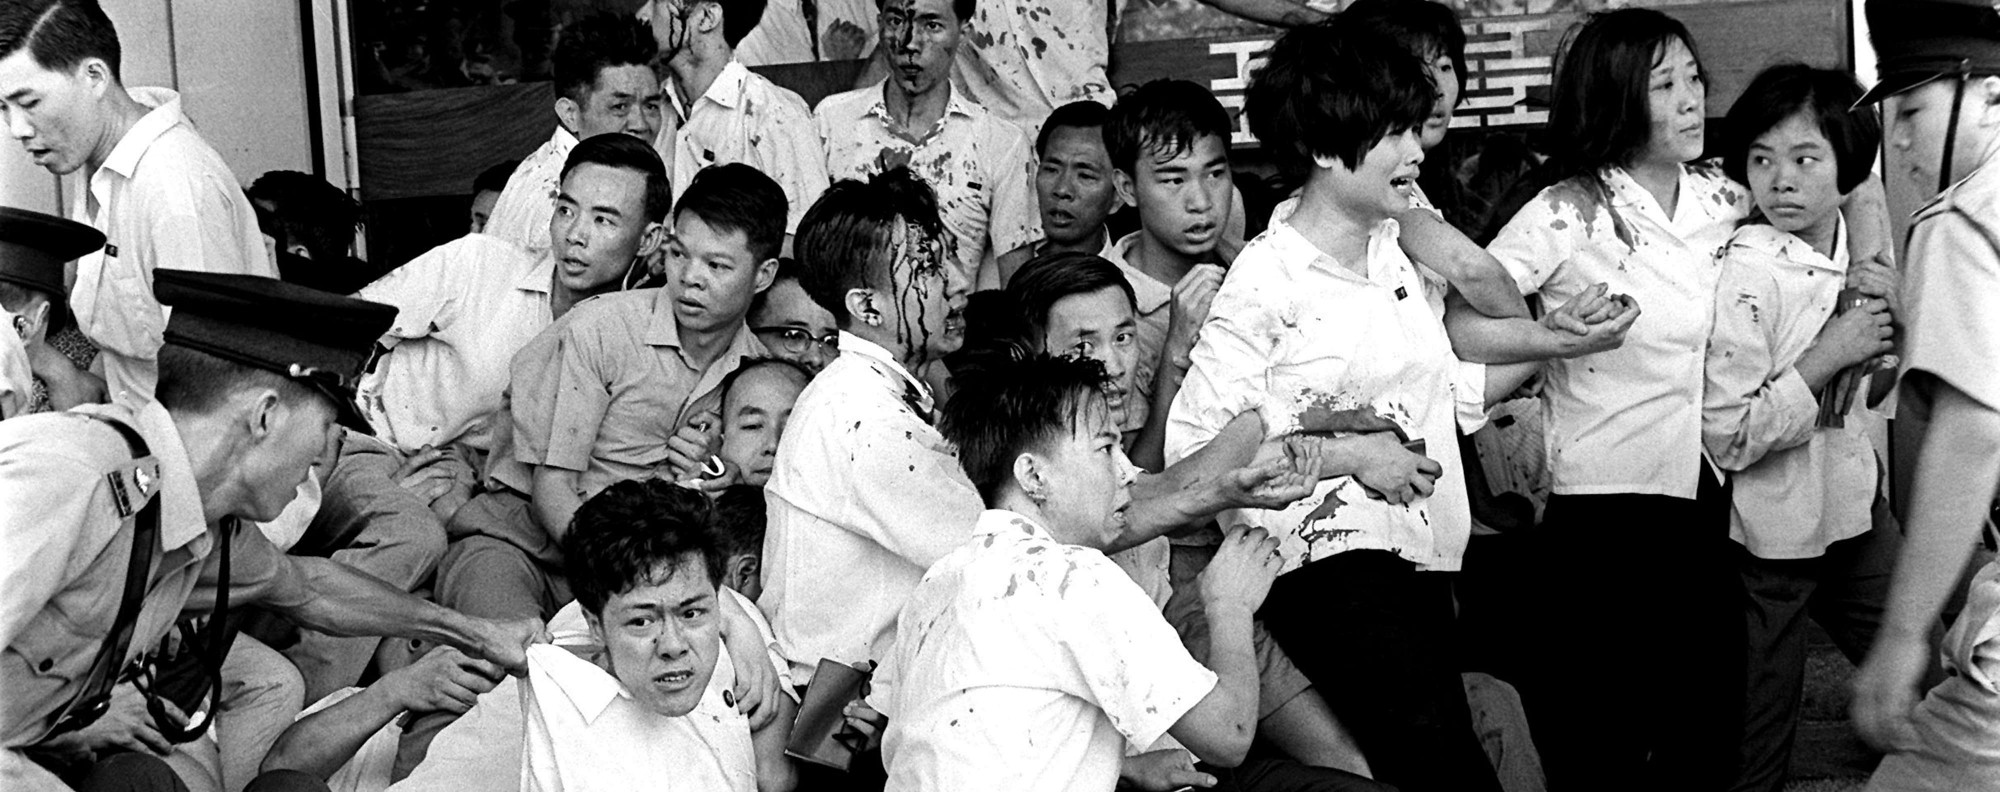 This picture shows bloody and beaten protesters being forcibly moved by riot police during the Hong Kong Riots in 1967. The riots were against the British Colonial rule, and were pro-communist, hoping to integrate with the rest of China. The police force, which were made up mostly of local Chinese, were sent in to disband the protestors when instead it turned violent. In the hard crackdown that followed, 52 people were killed, with another 800 wounded. The police also arrested some 2000 people including all suspected leaders of the protests. To combat this, small terrorist actions such as bombing occurred against the police and British Colonial rule. Eventually, all order was restored and Britain retained full control of Hong Kong.